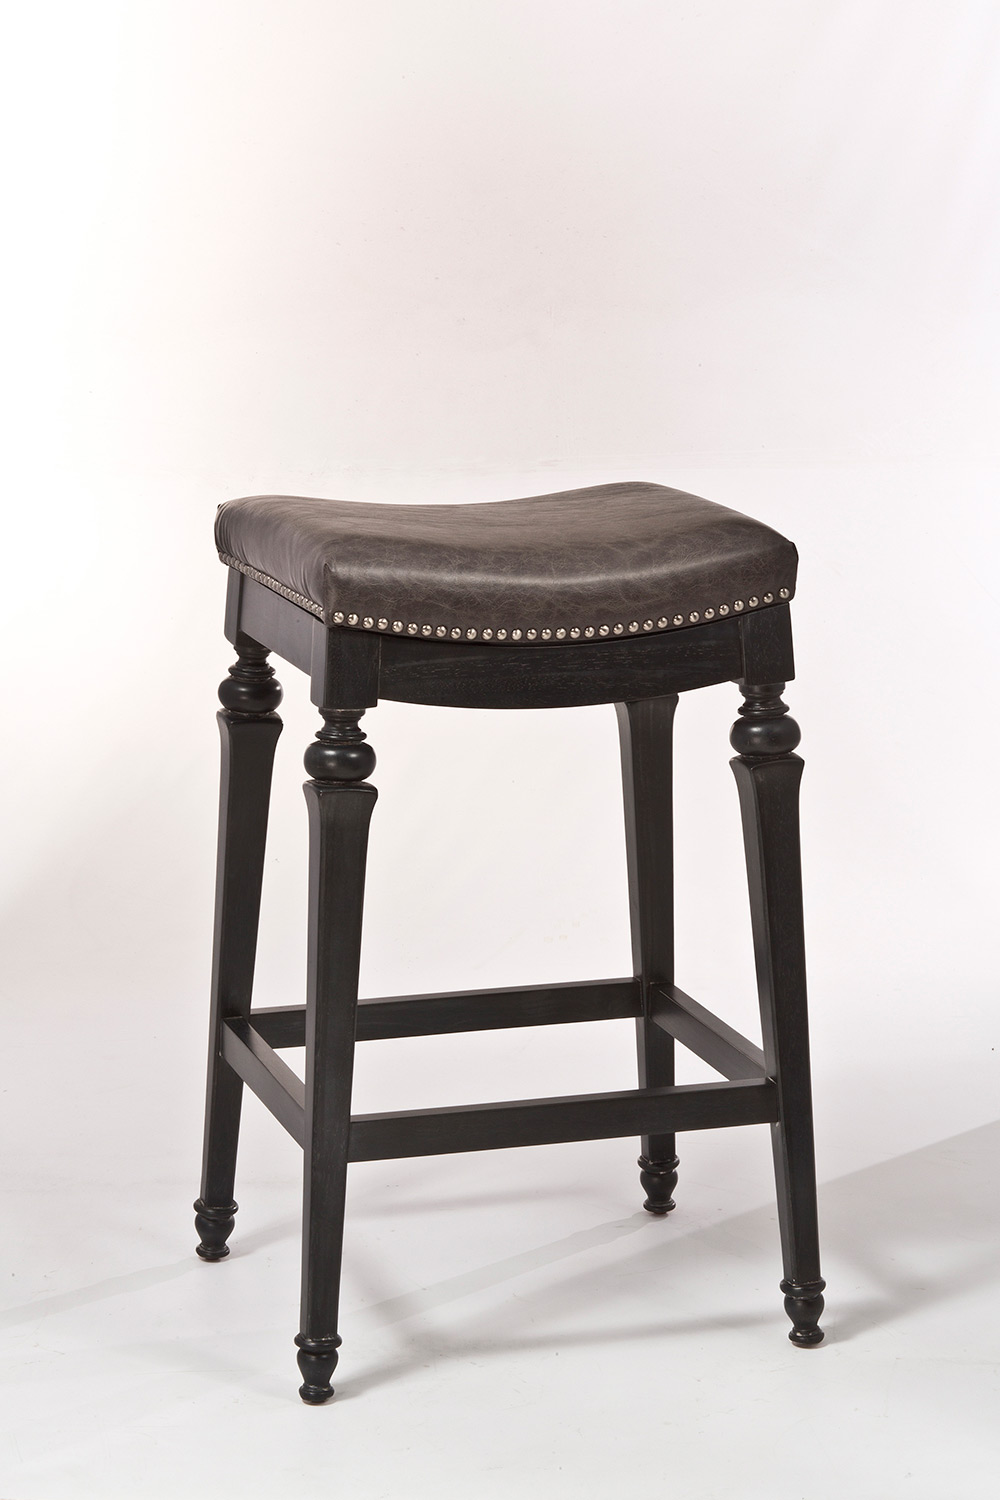 Hillsdale Vetrina Backless Non-Swivel Counter Stool - Black/Gold Rub - Charcoal Faux Leather